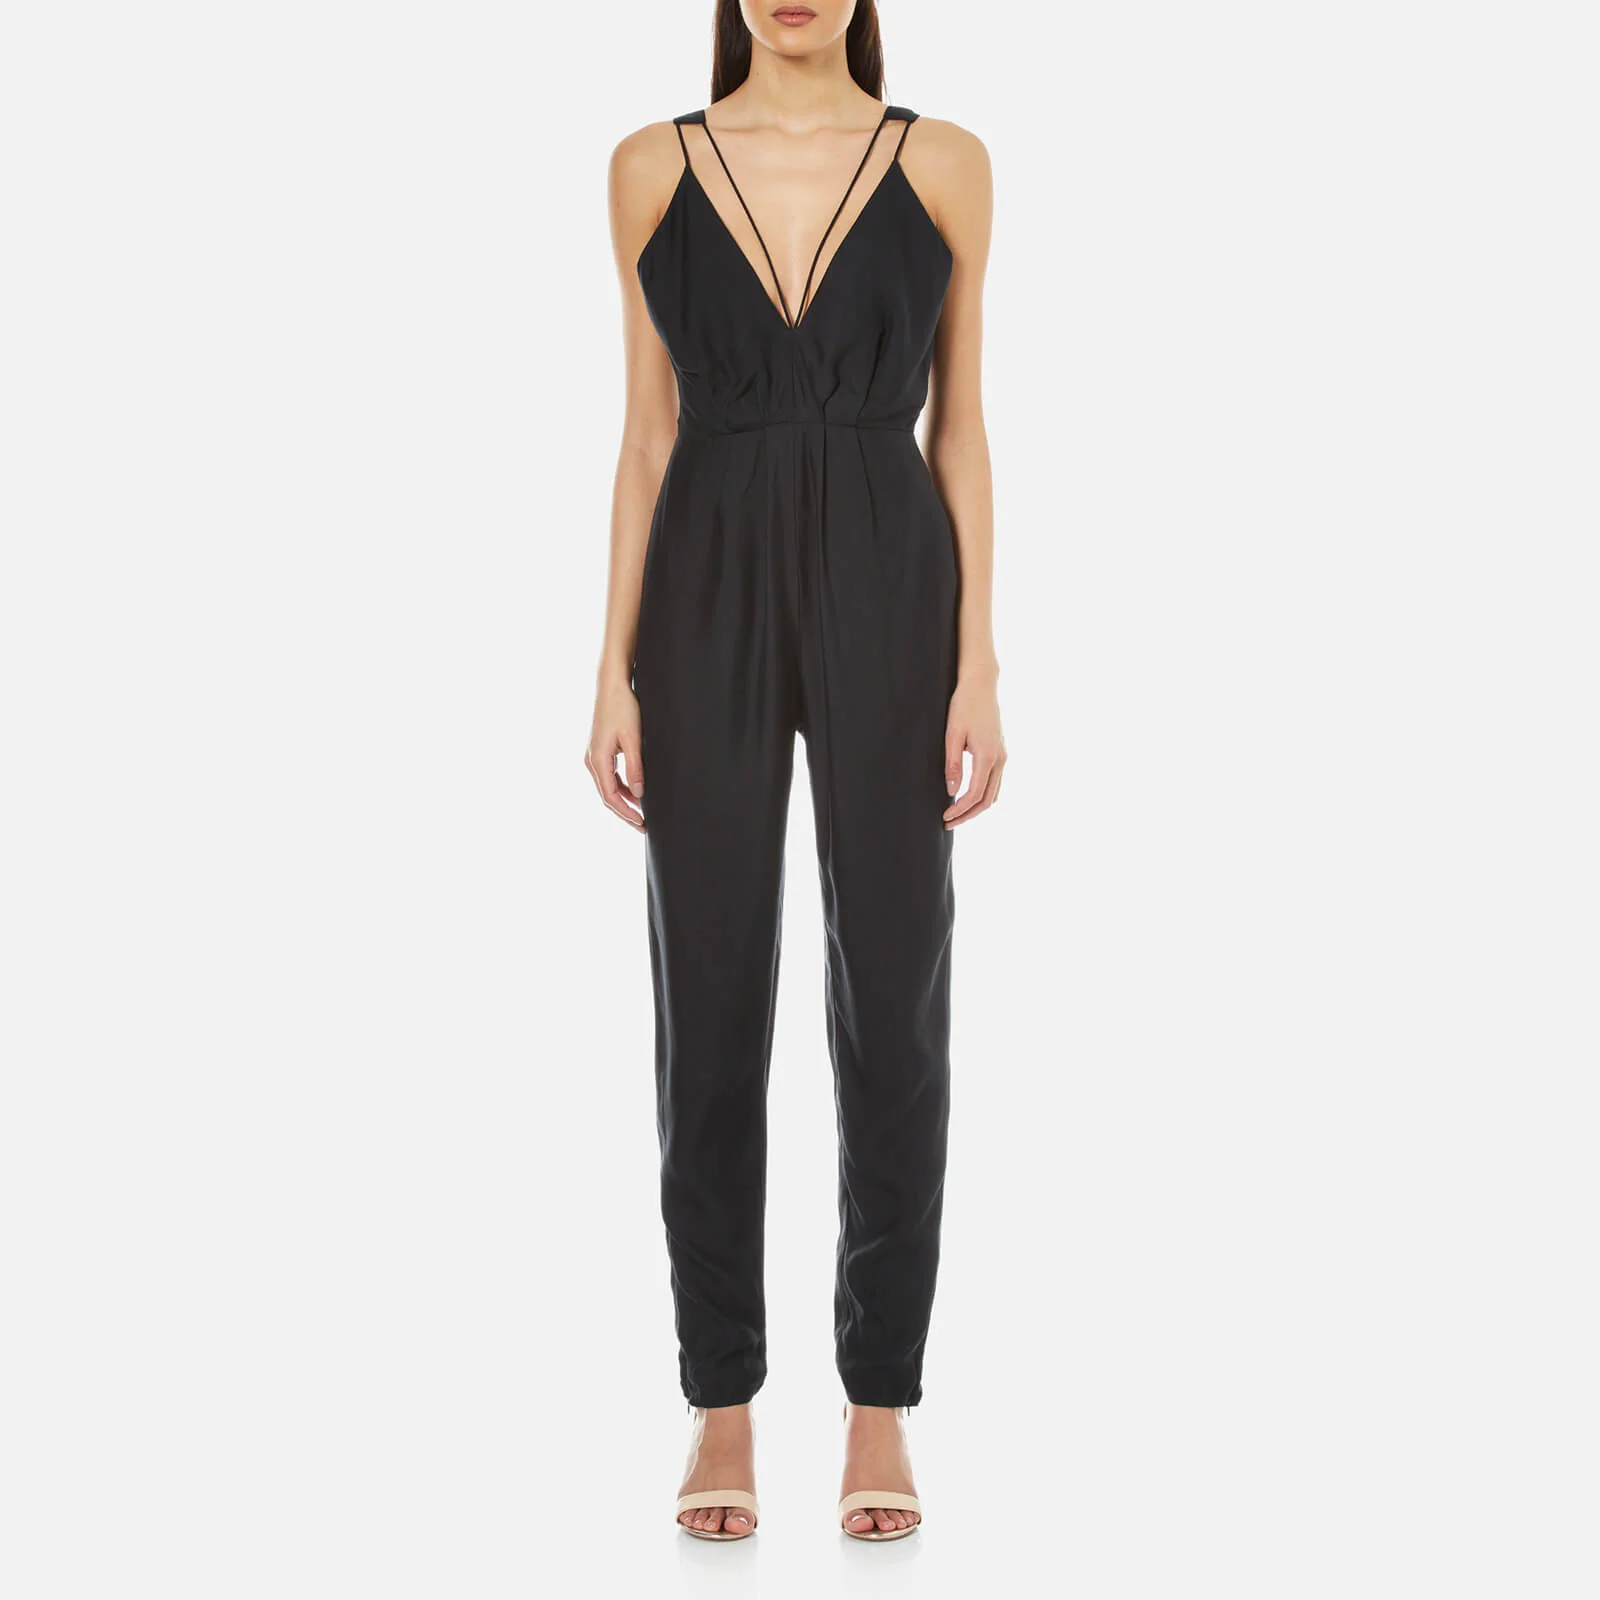 C/MEO COLLECTIVE Women's Set in Stone Jumpsuit - Black Image 1